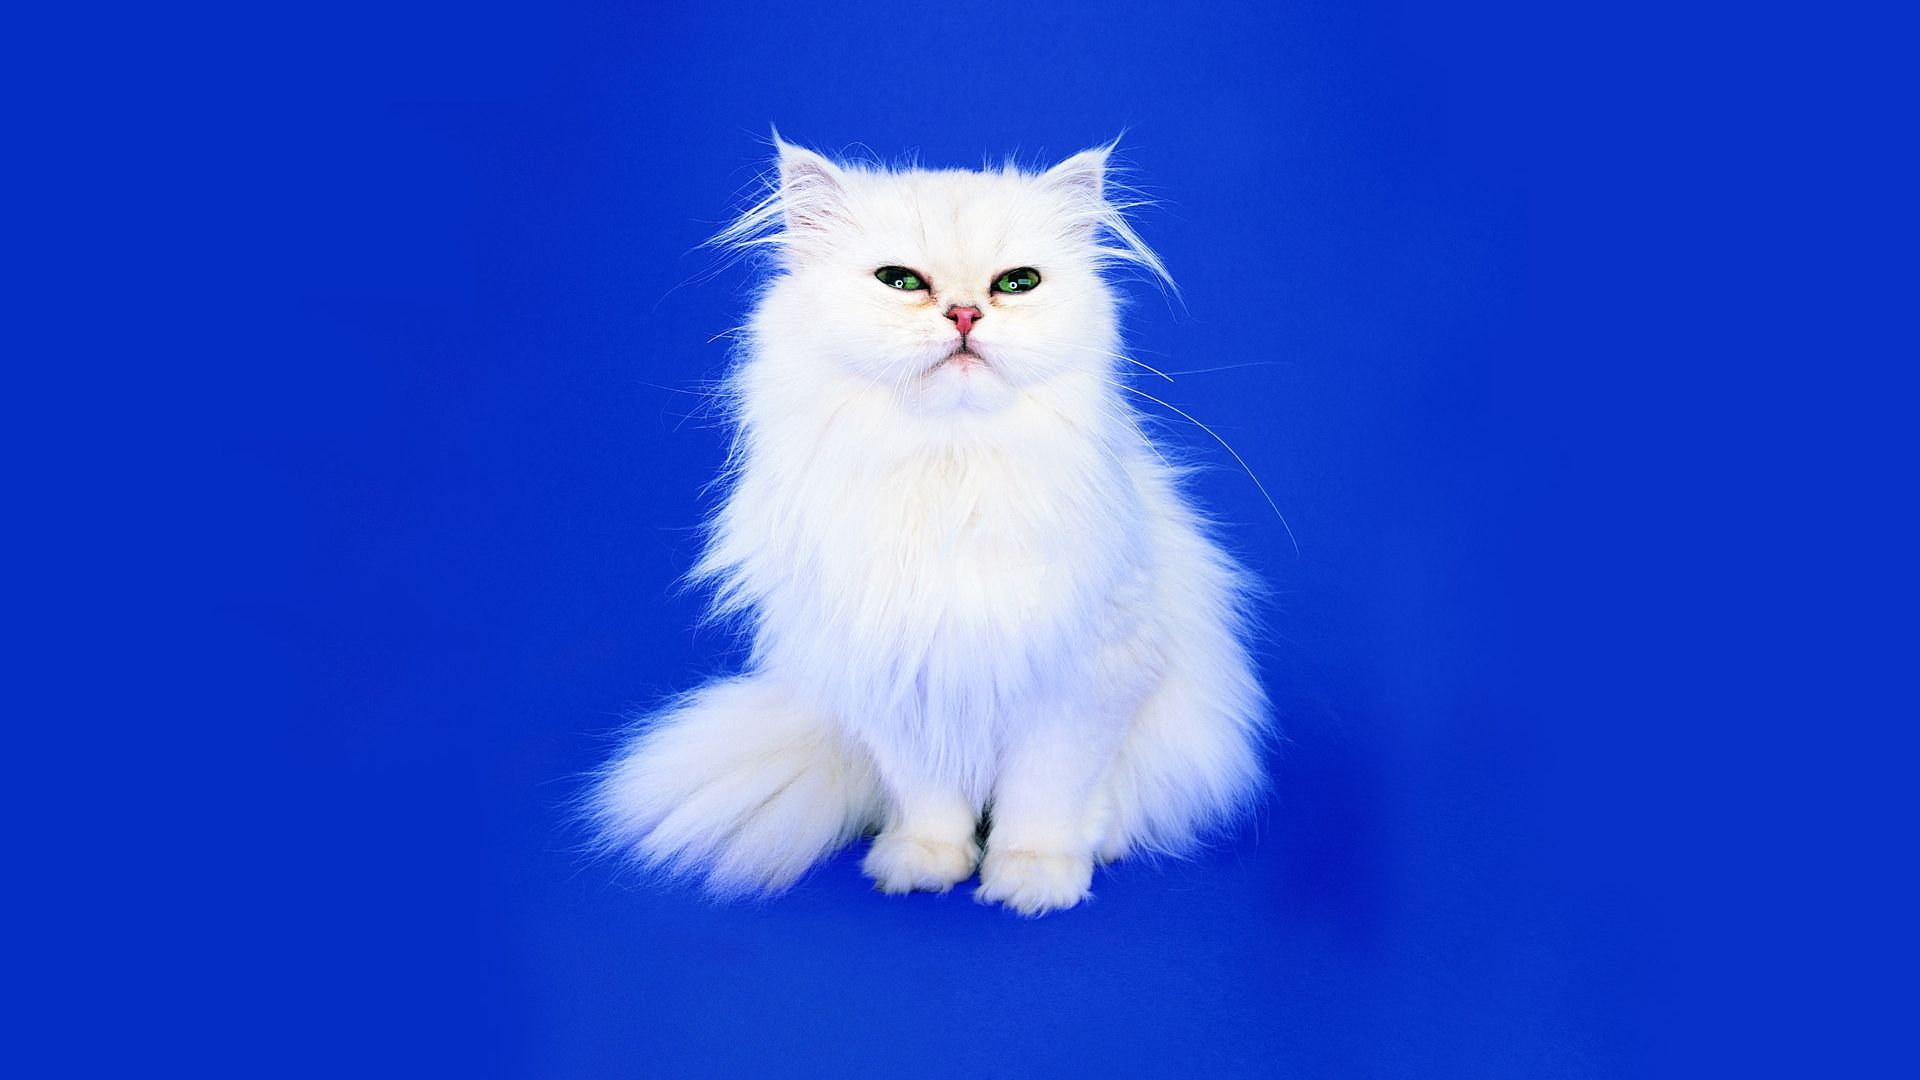 Furry White Cat with Blue Background Wallpaper